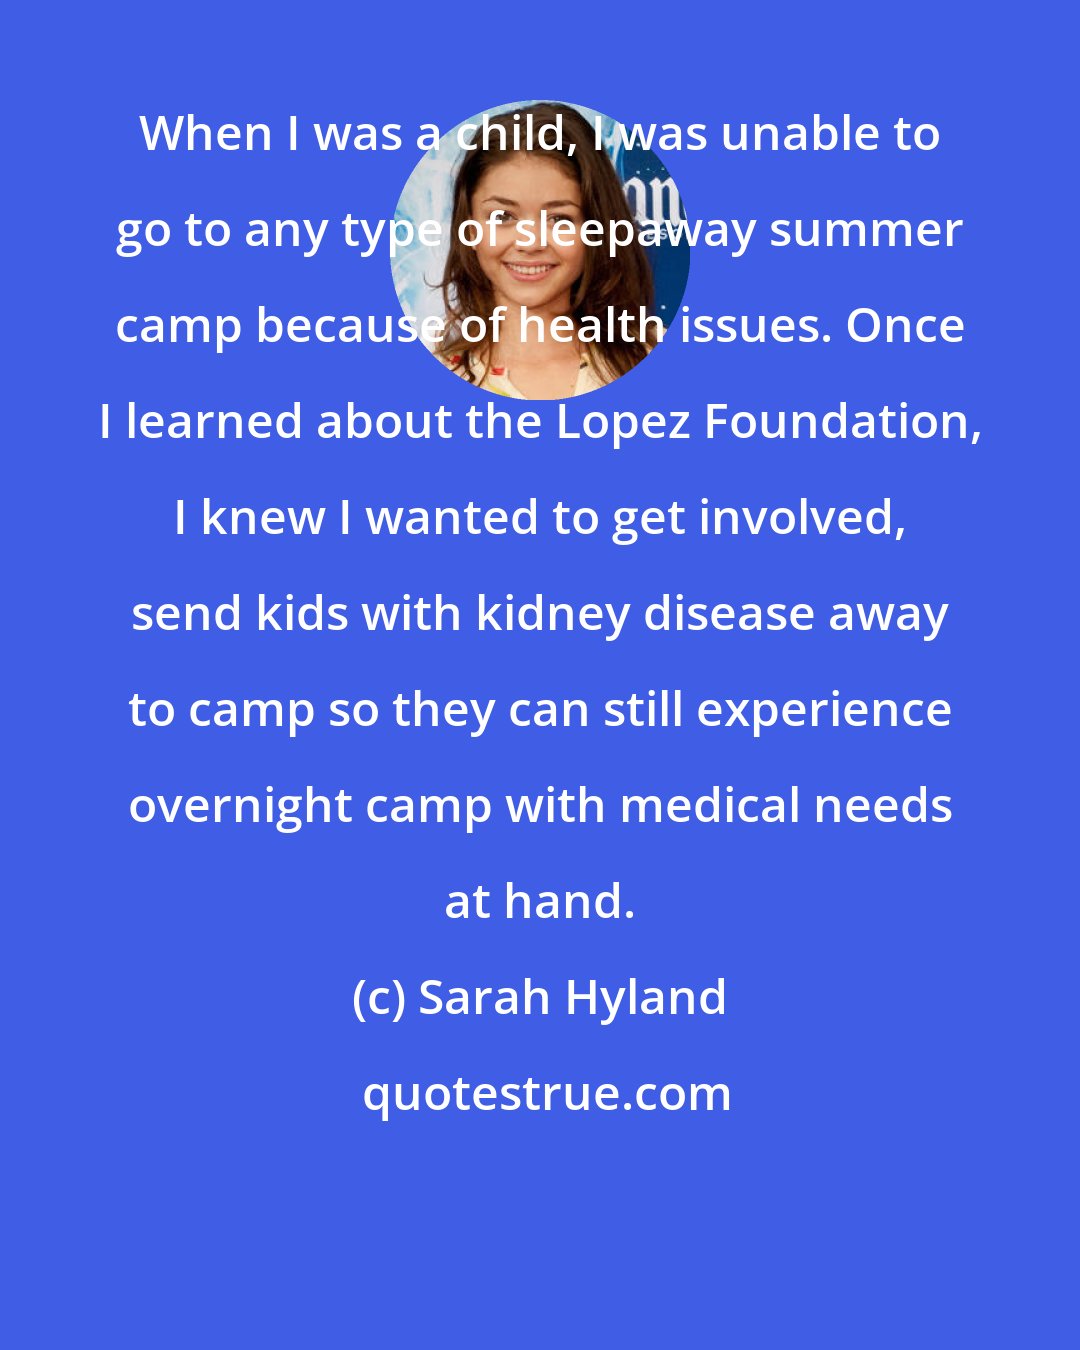 Sarah Hyland: When I was a child, I was unable to go to any type of sleepaway summer camp because of health issues. Once I learned about the Lopez Foundation, I knew I wanted to get involved, send kids with kidney disease away to camp so they can still experience overnight camp with medical needs at hand.